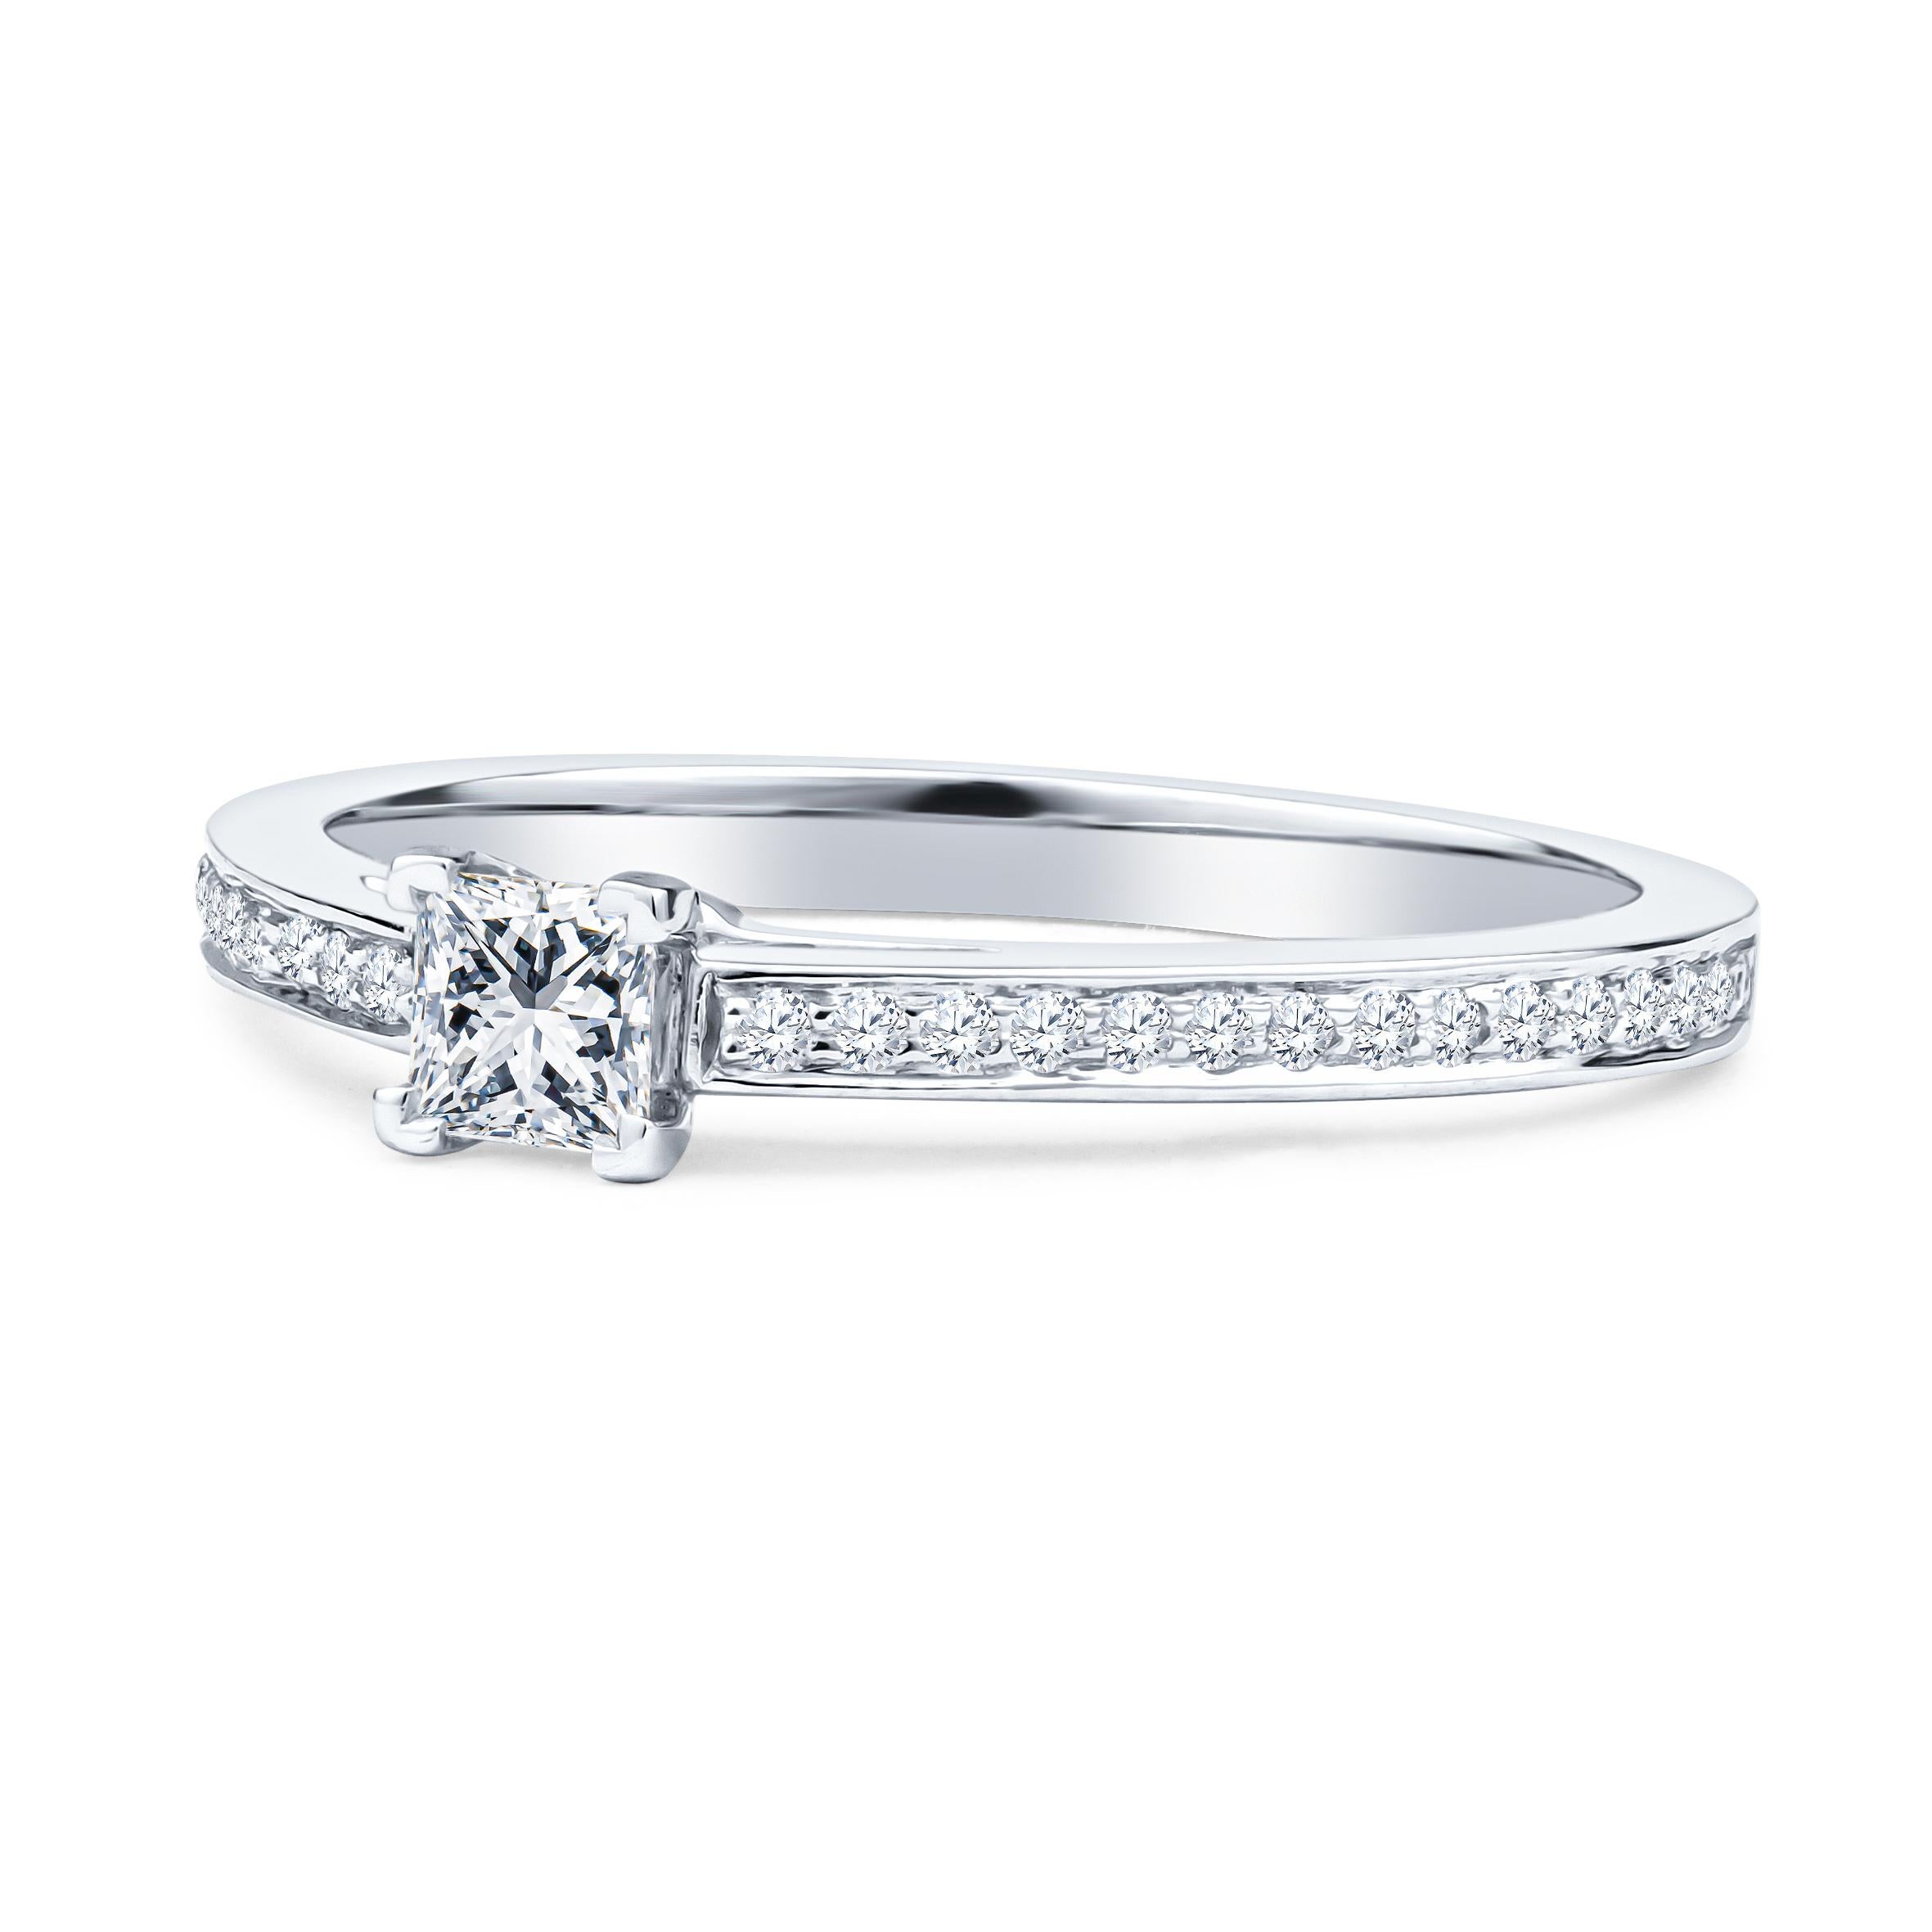 This dainty Tiffany & Co. design is the Grace Diamond Ring, featuring an approximately 0.17ct princess cut diamond center, with about 0.19ctw in round accent diamonds, set in a platinum ring. The diamonds are of D-F color, VS1-VVS1 clarity. This